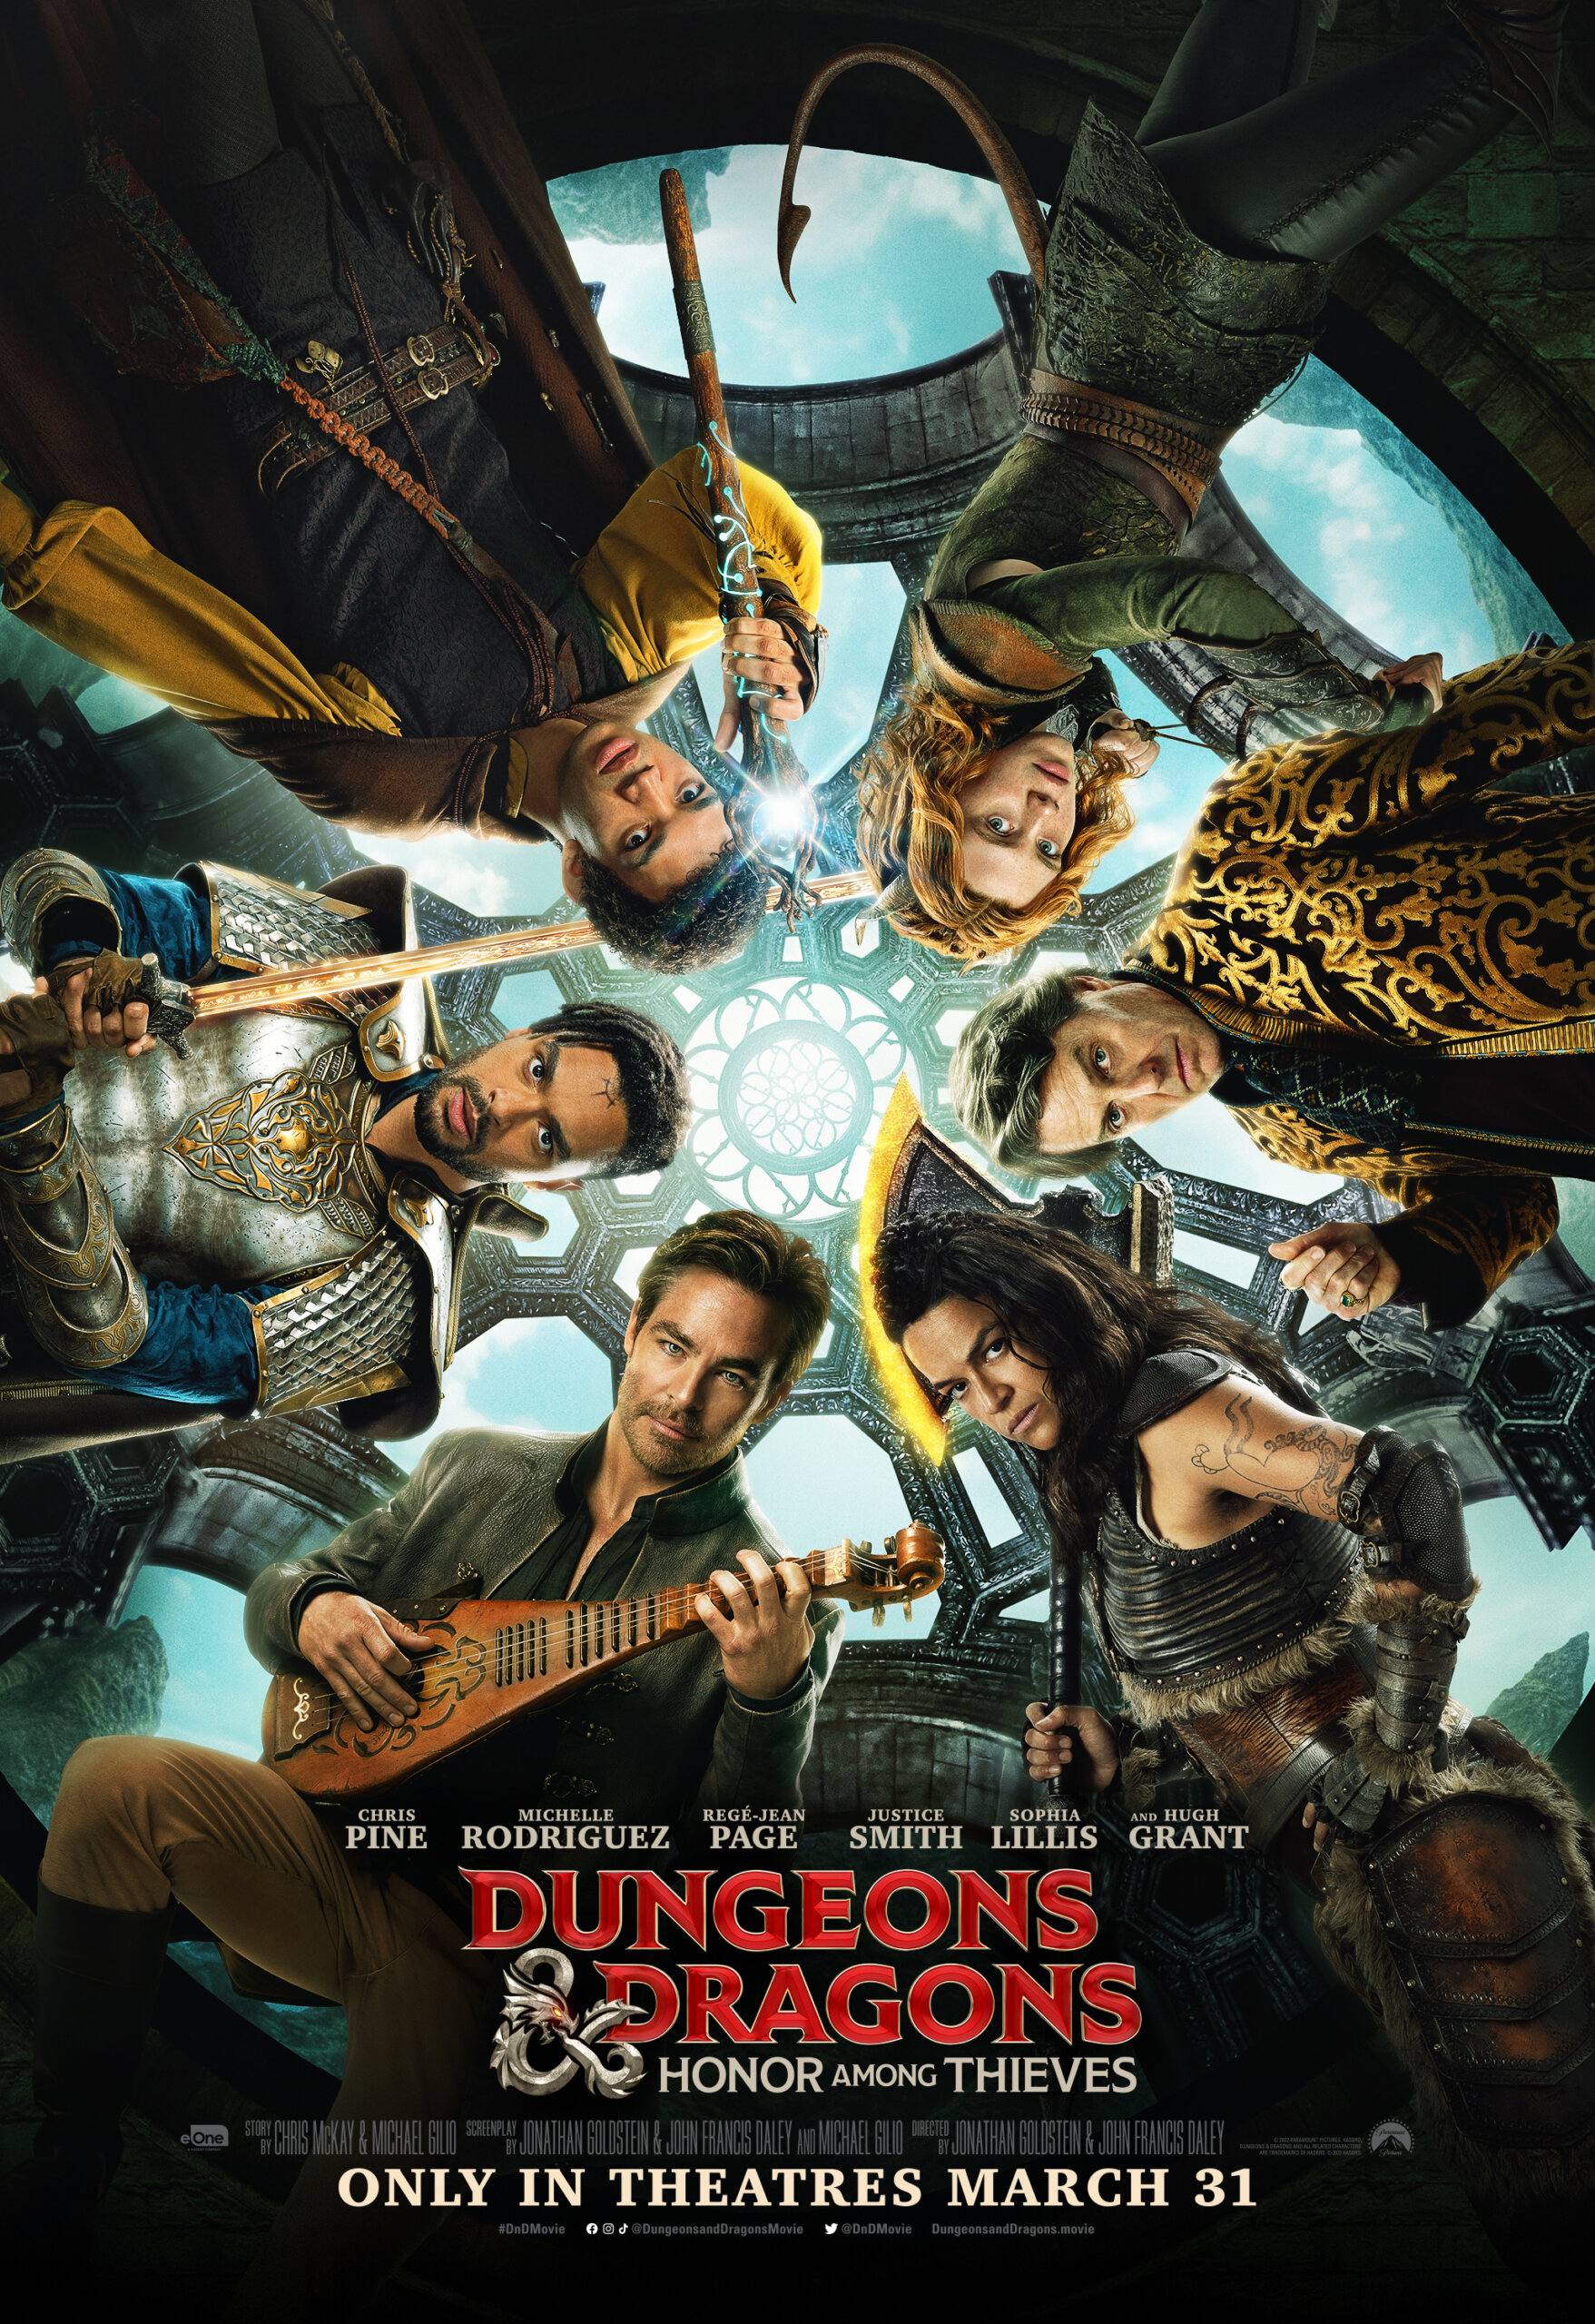 2nd Trailer For 'Dungeons & Dragons: Honor Among Thieves' Movie